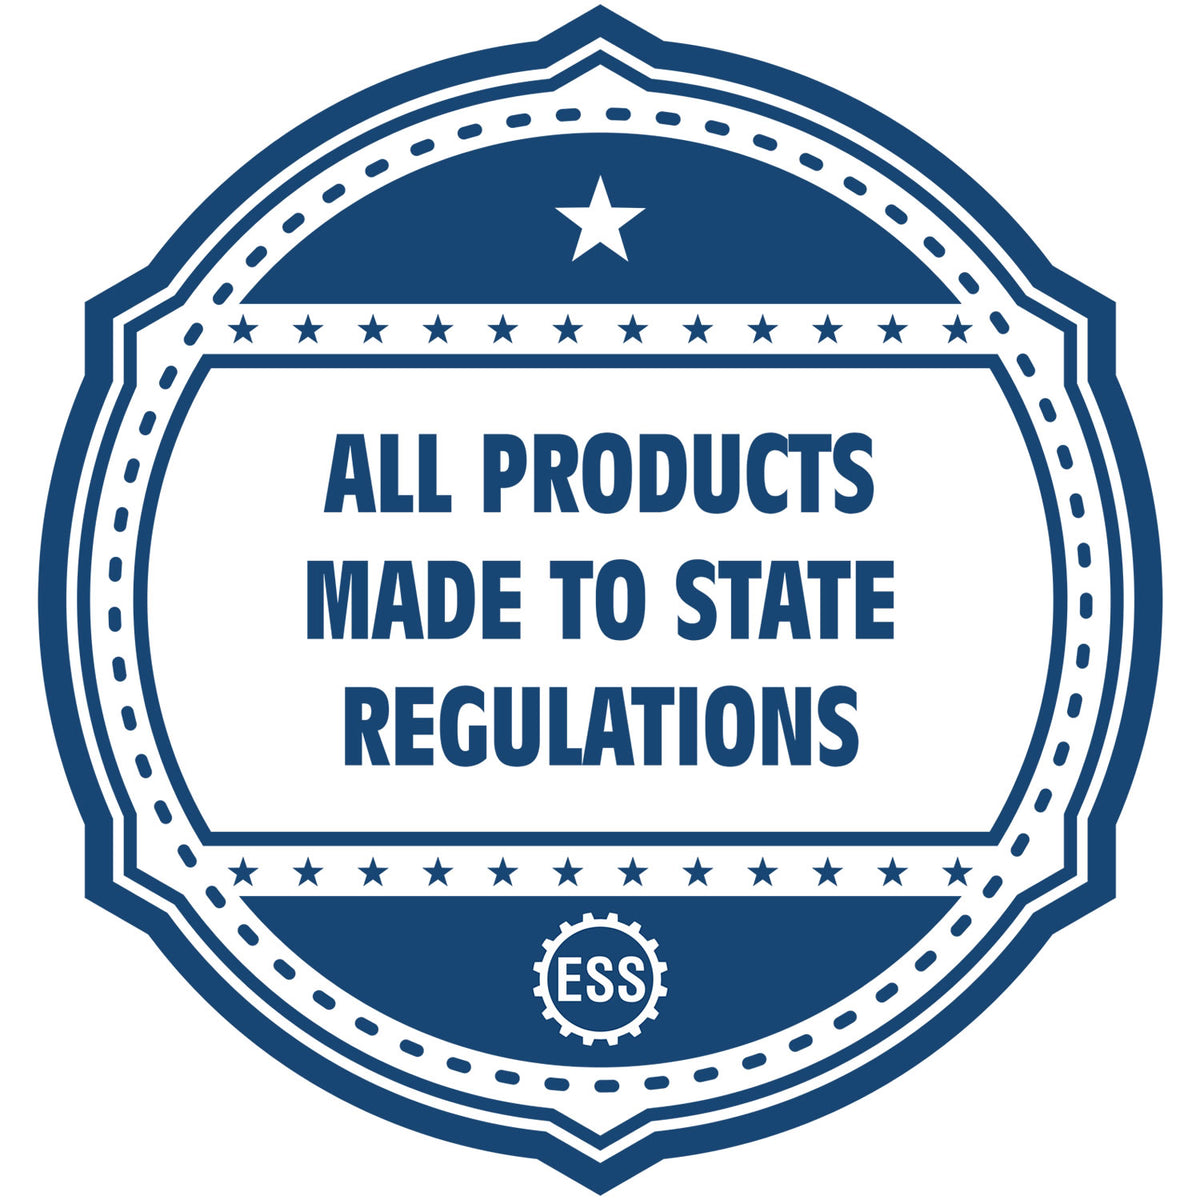 An icon or badge element for the MaxLight Premium Pre-Inked Delaware State Seal Notarial Stamp showing that this product is made in compliance with state regulations.